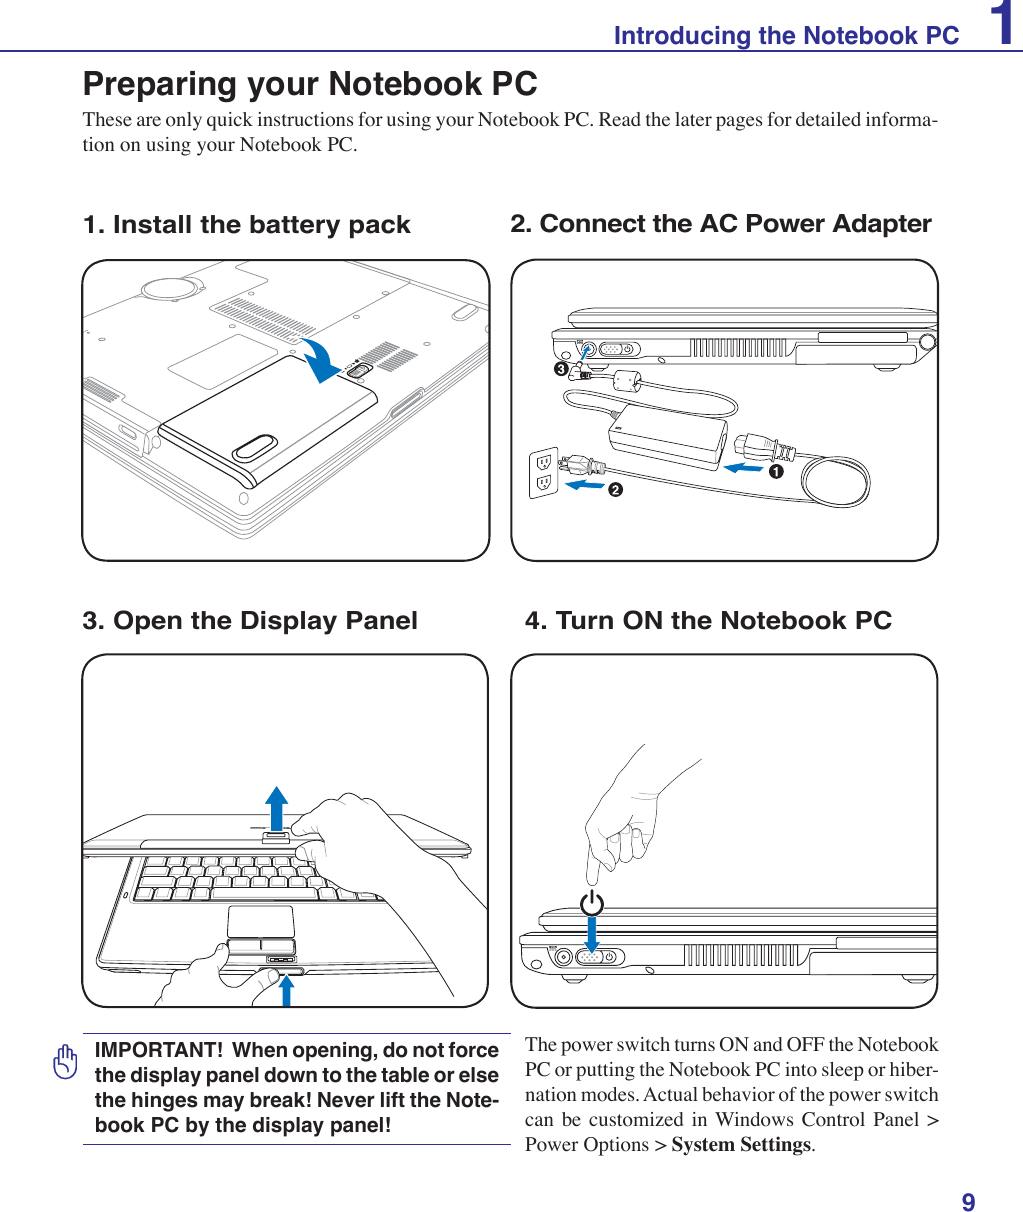 9Introducing the Notebook PC 1Preparing your Notebook PCThese are only quick instructions for using your Notebook PC. Read the later pages for detailed informa-tion on using your Notebook PC.1. Install the battery pack 2. Connect the AC Power AdapterIMPORTANT!  When opening, do not force the display panel down to the table or else the hinges may break! Never lift the Note-book PC by the display panel!POWER3. Open the Display Panel 4. Turn ON the Notebook PCThe power switch turns ON and OFF the Notebook PC or putting the Notebook PC into sleep or hiber-nation modes. Actual behavior of the power switch can be customized in Windows Control Panel &gt; Power Options &gt; System Settings.